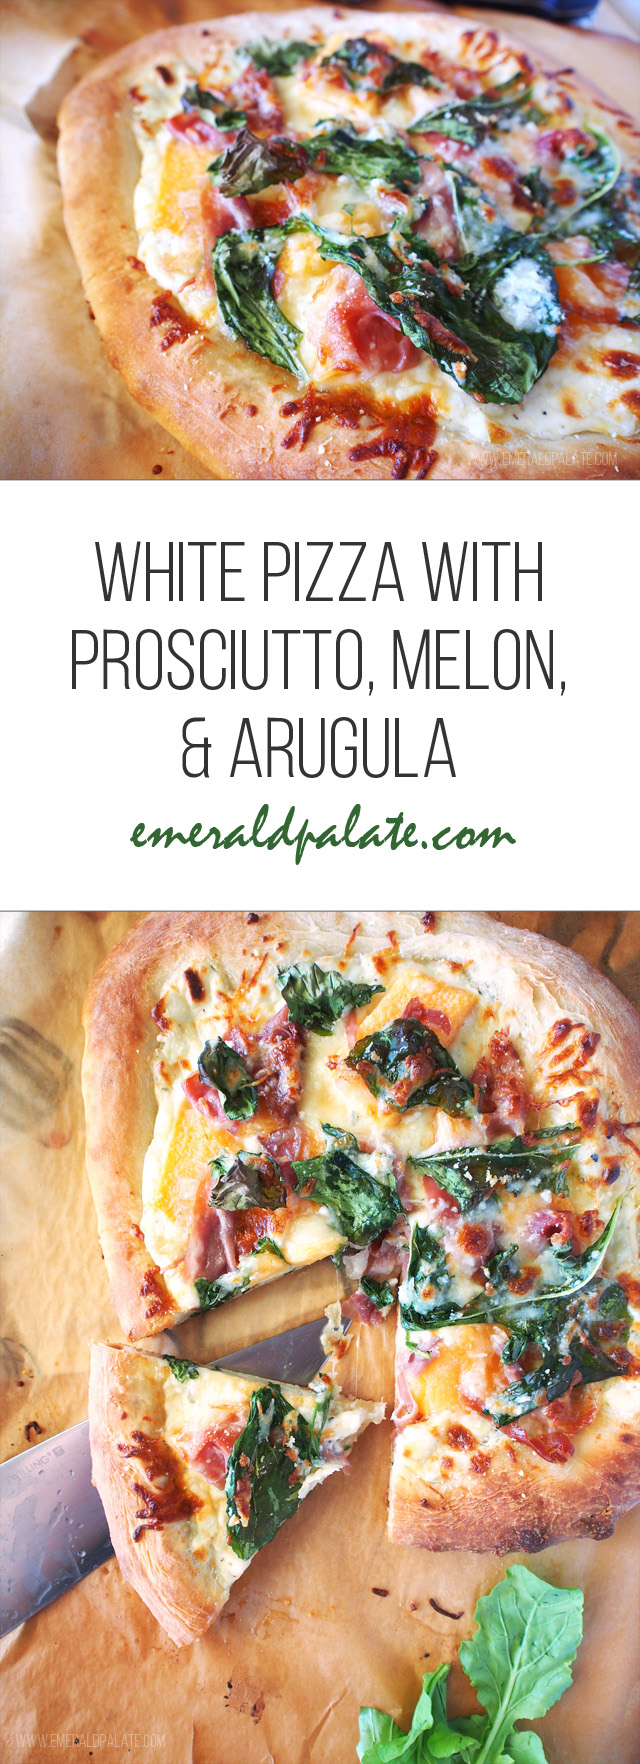 This white pizza recipe has prosciutto, melon, and arugula with a light Alfredo sauce instead of red sauce.